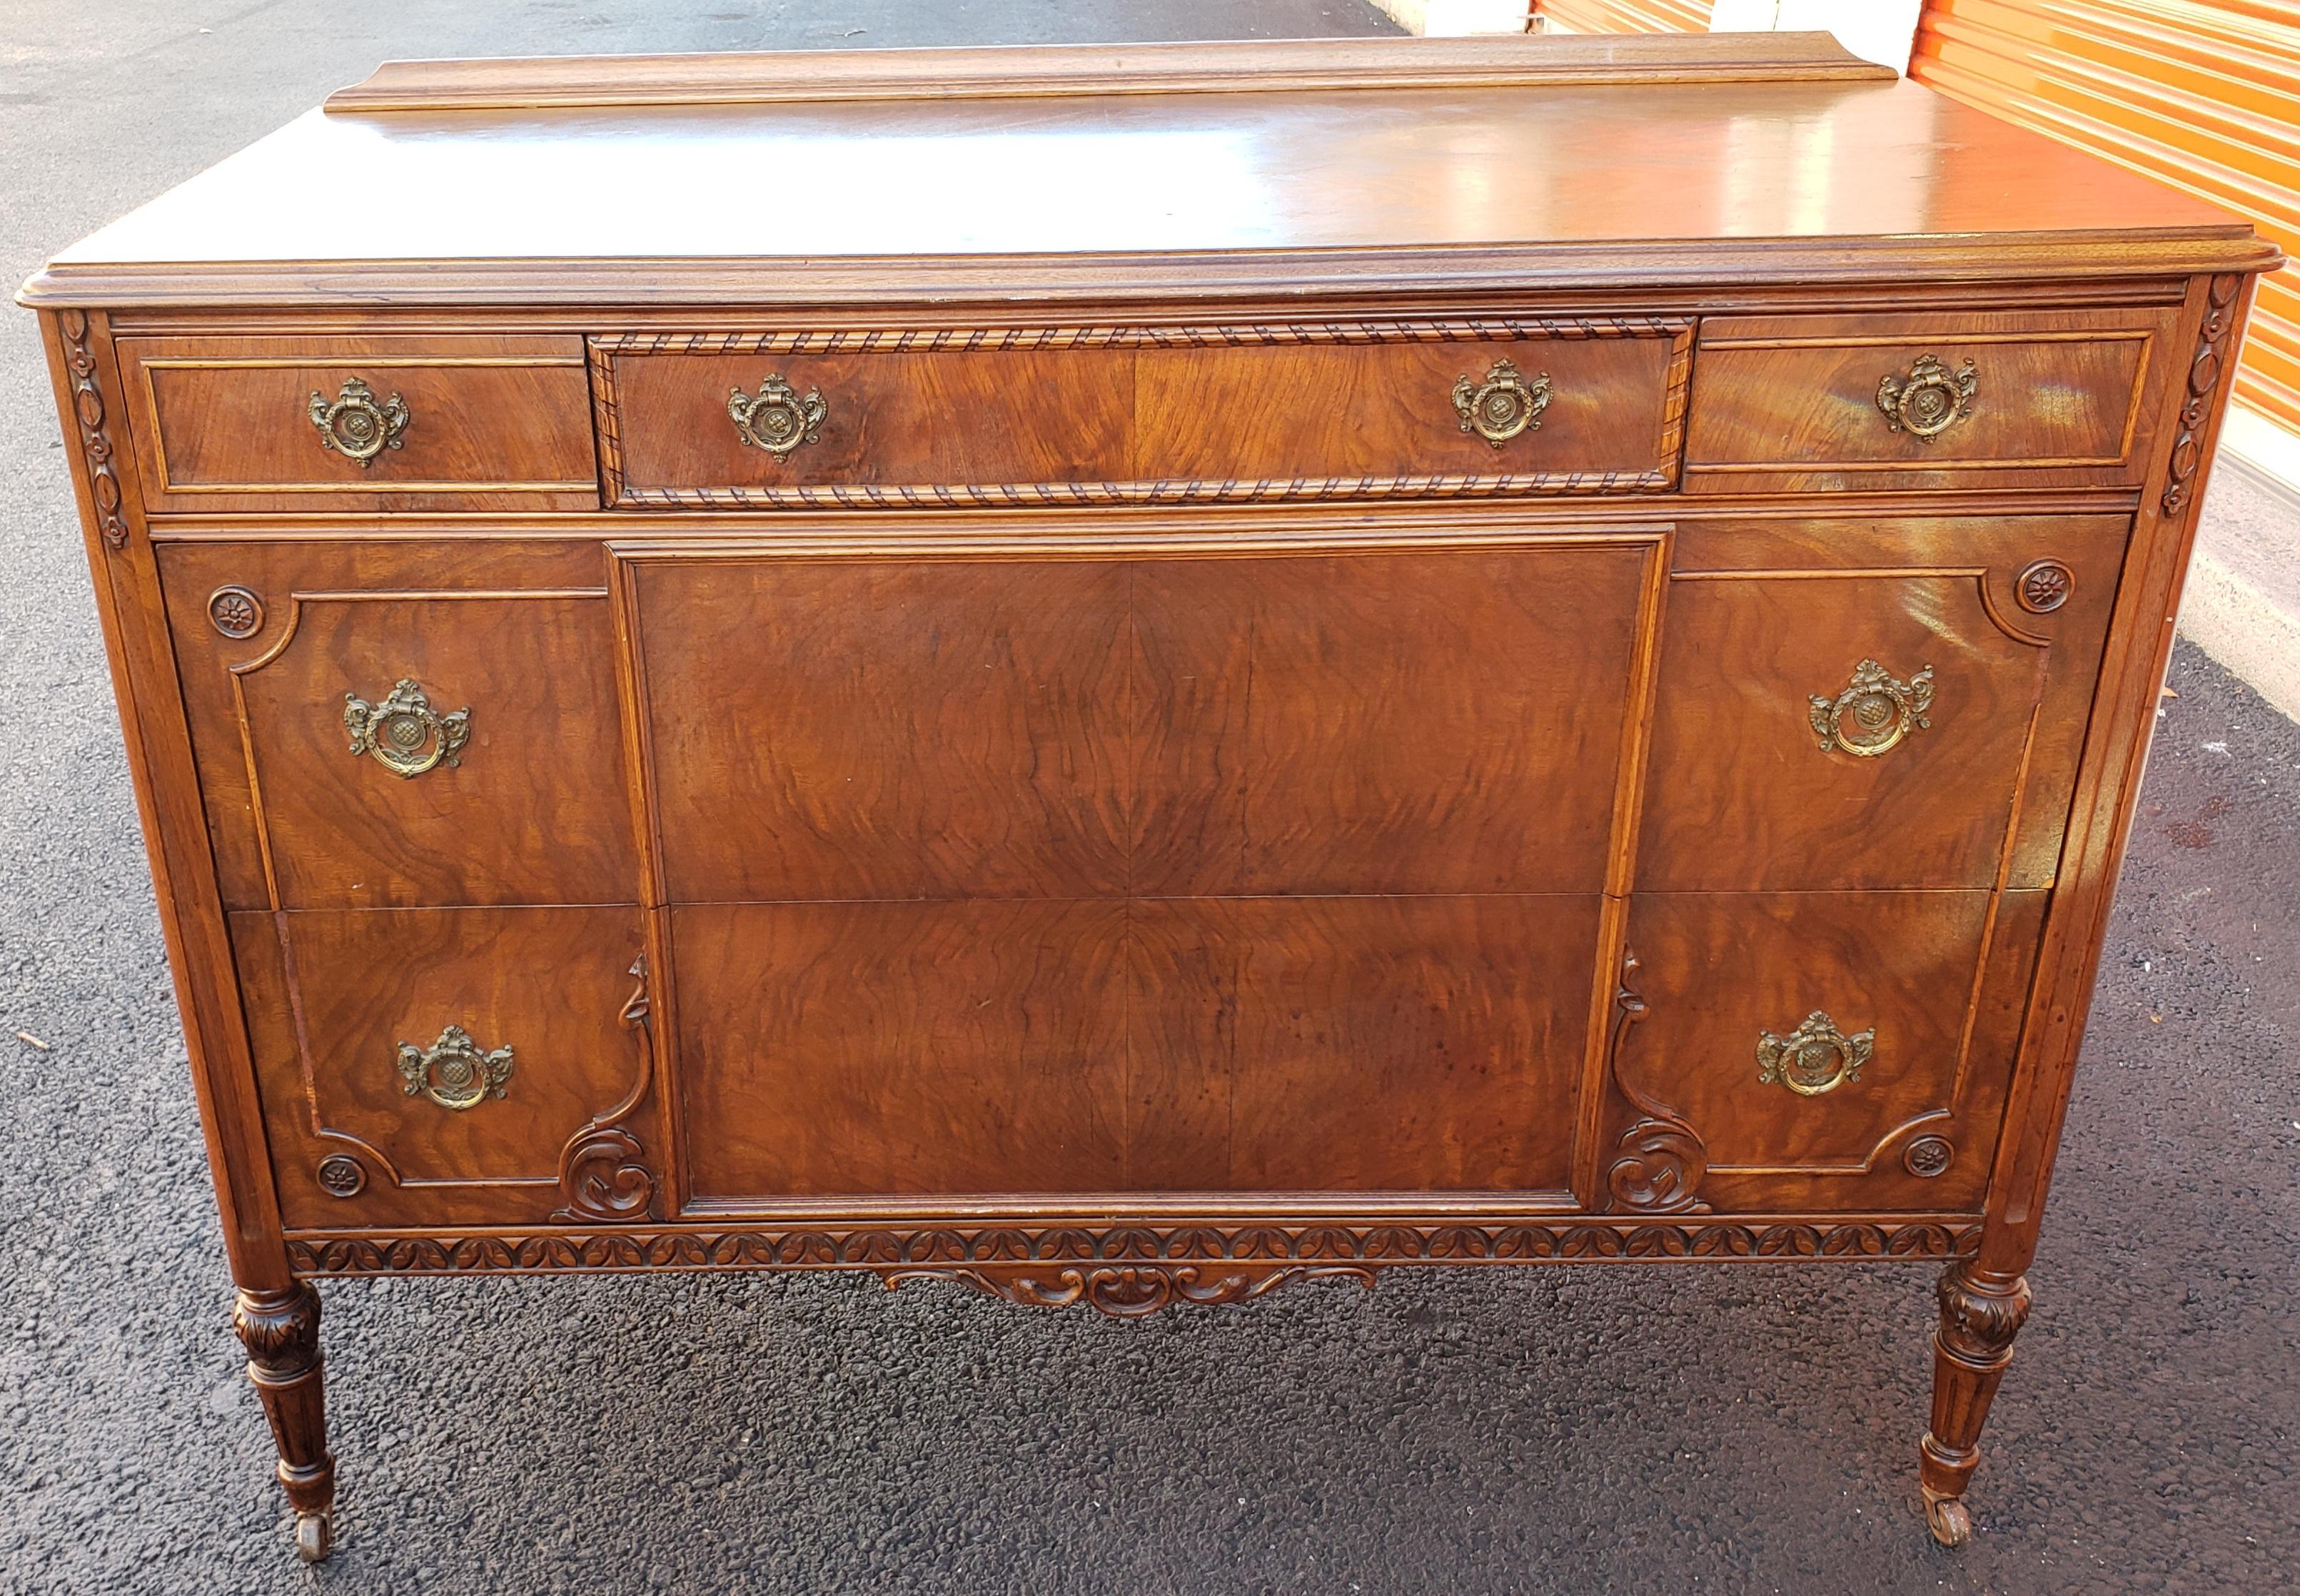 20th Century Phenix Furniture Chest of Drawers with Integrated Mirror and Cedar Lined Drawer